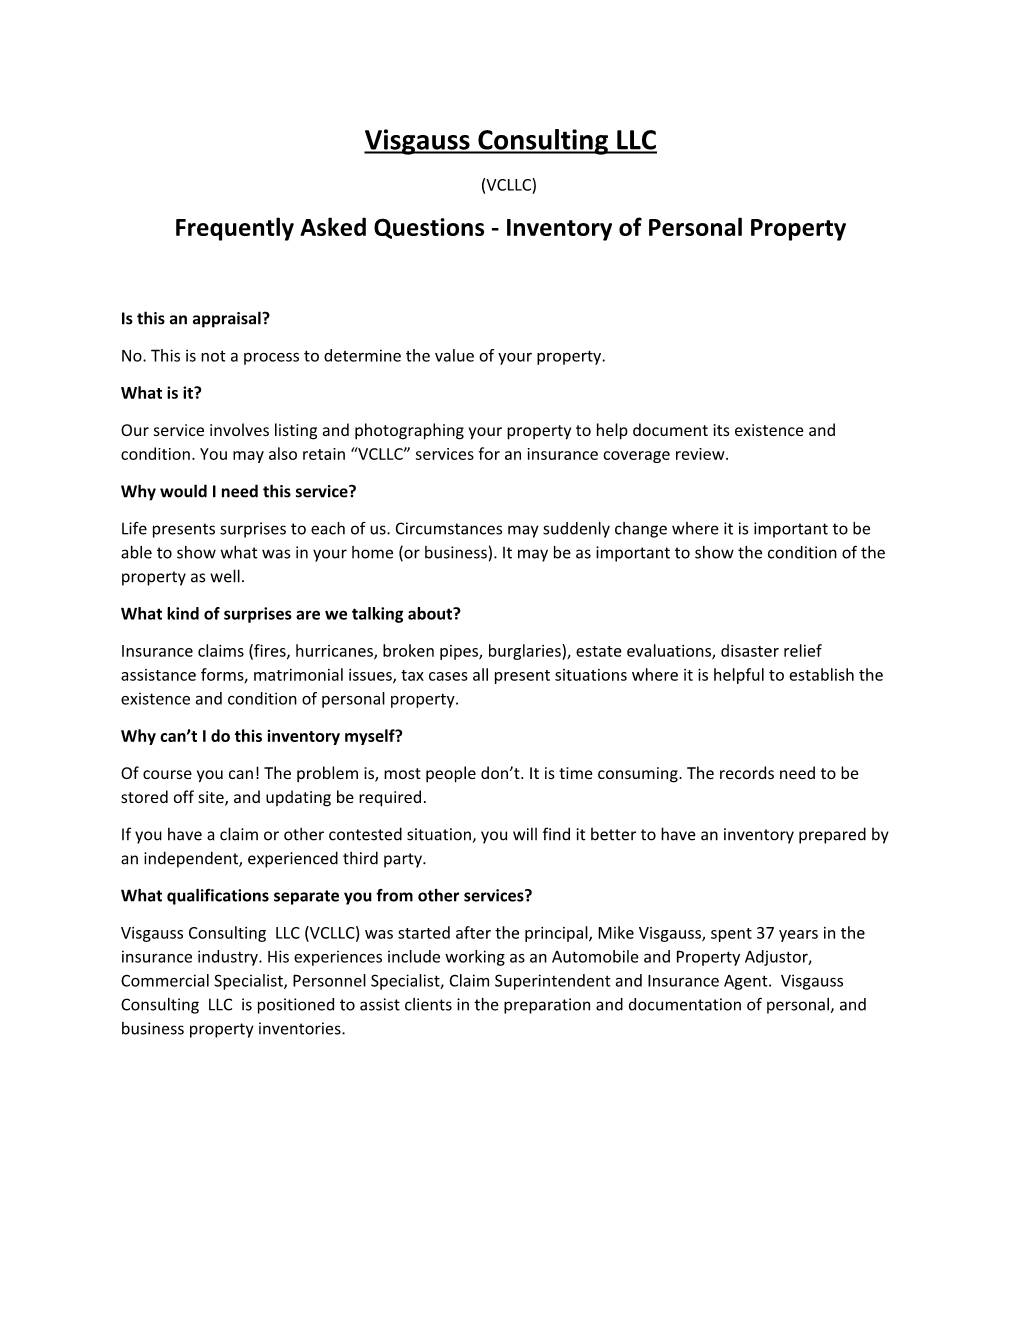 Frequently Asked Questions - Inventory of Personal Property